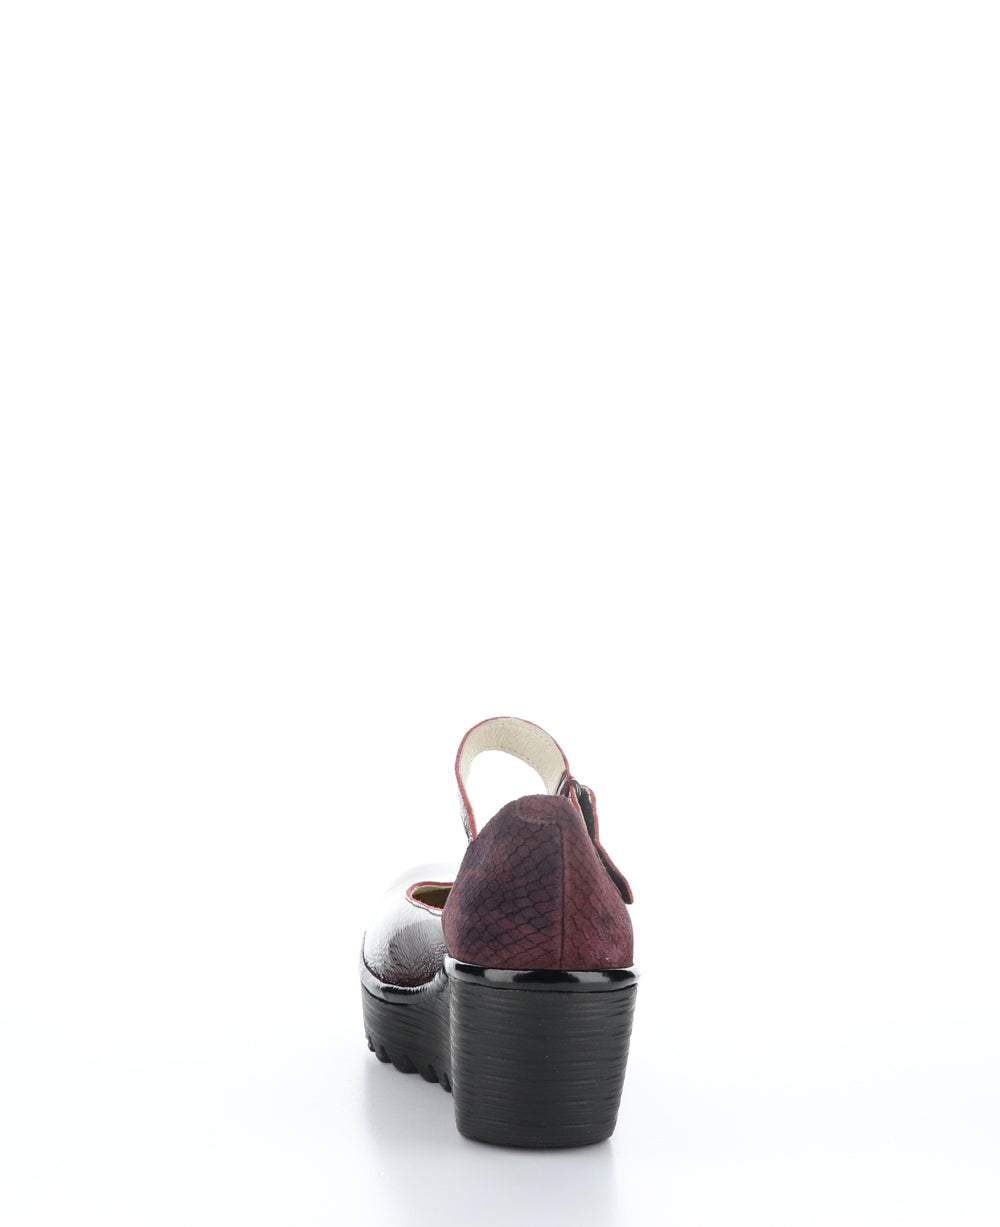 YAWO345FLY Cordoba Red/Wine Round Toe Shoes|YAWO345FLY Chaussures à Bout Rond in Rouge